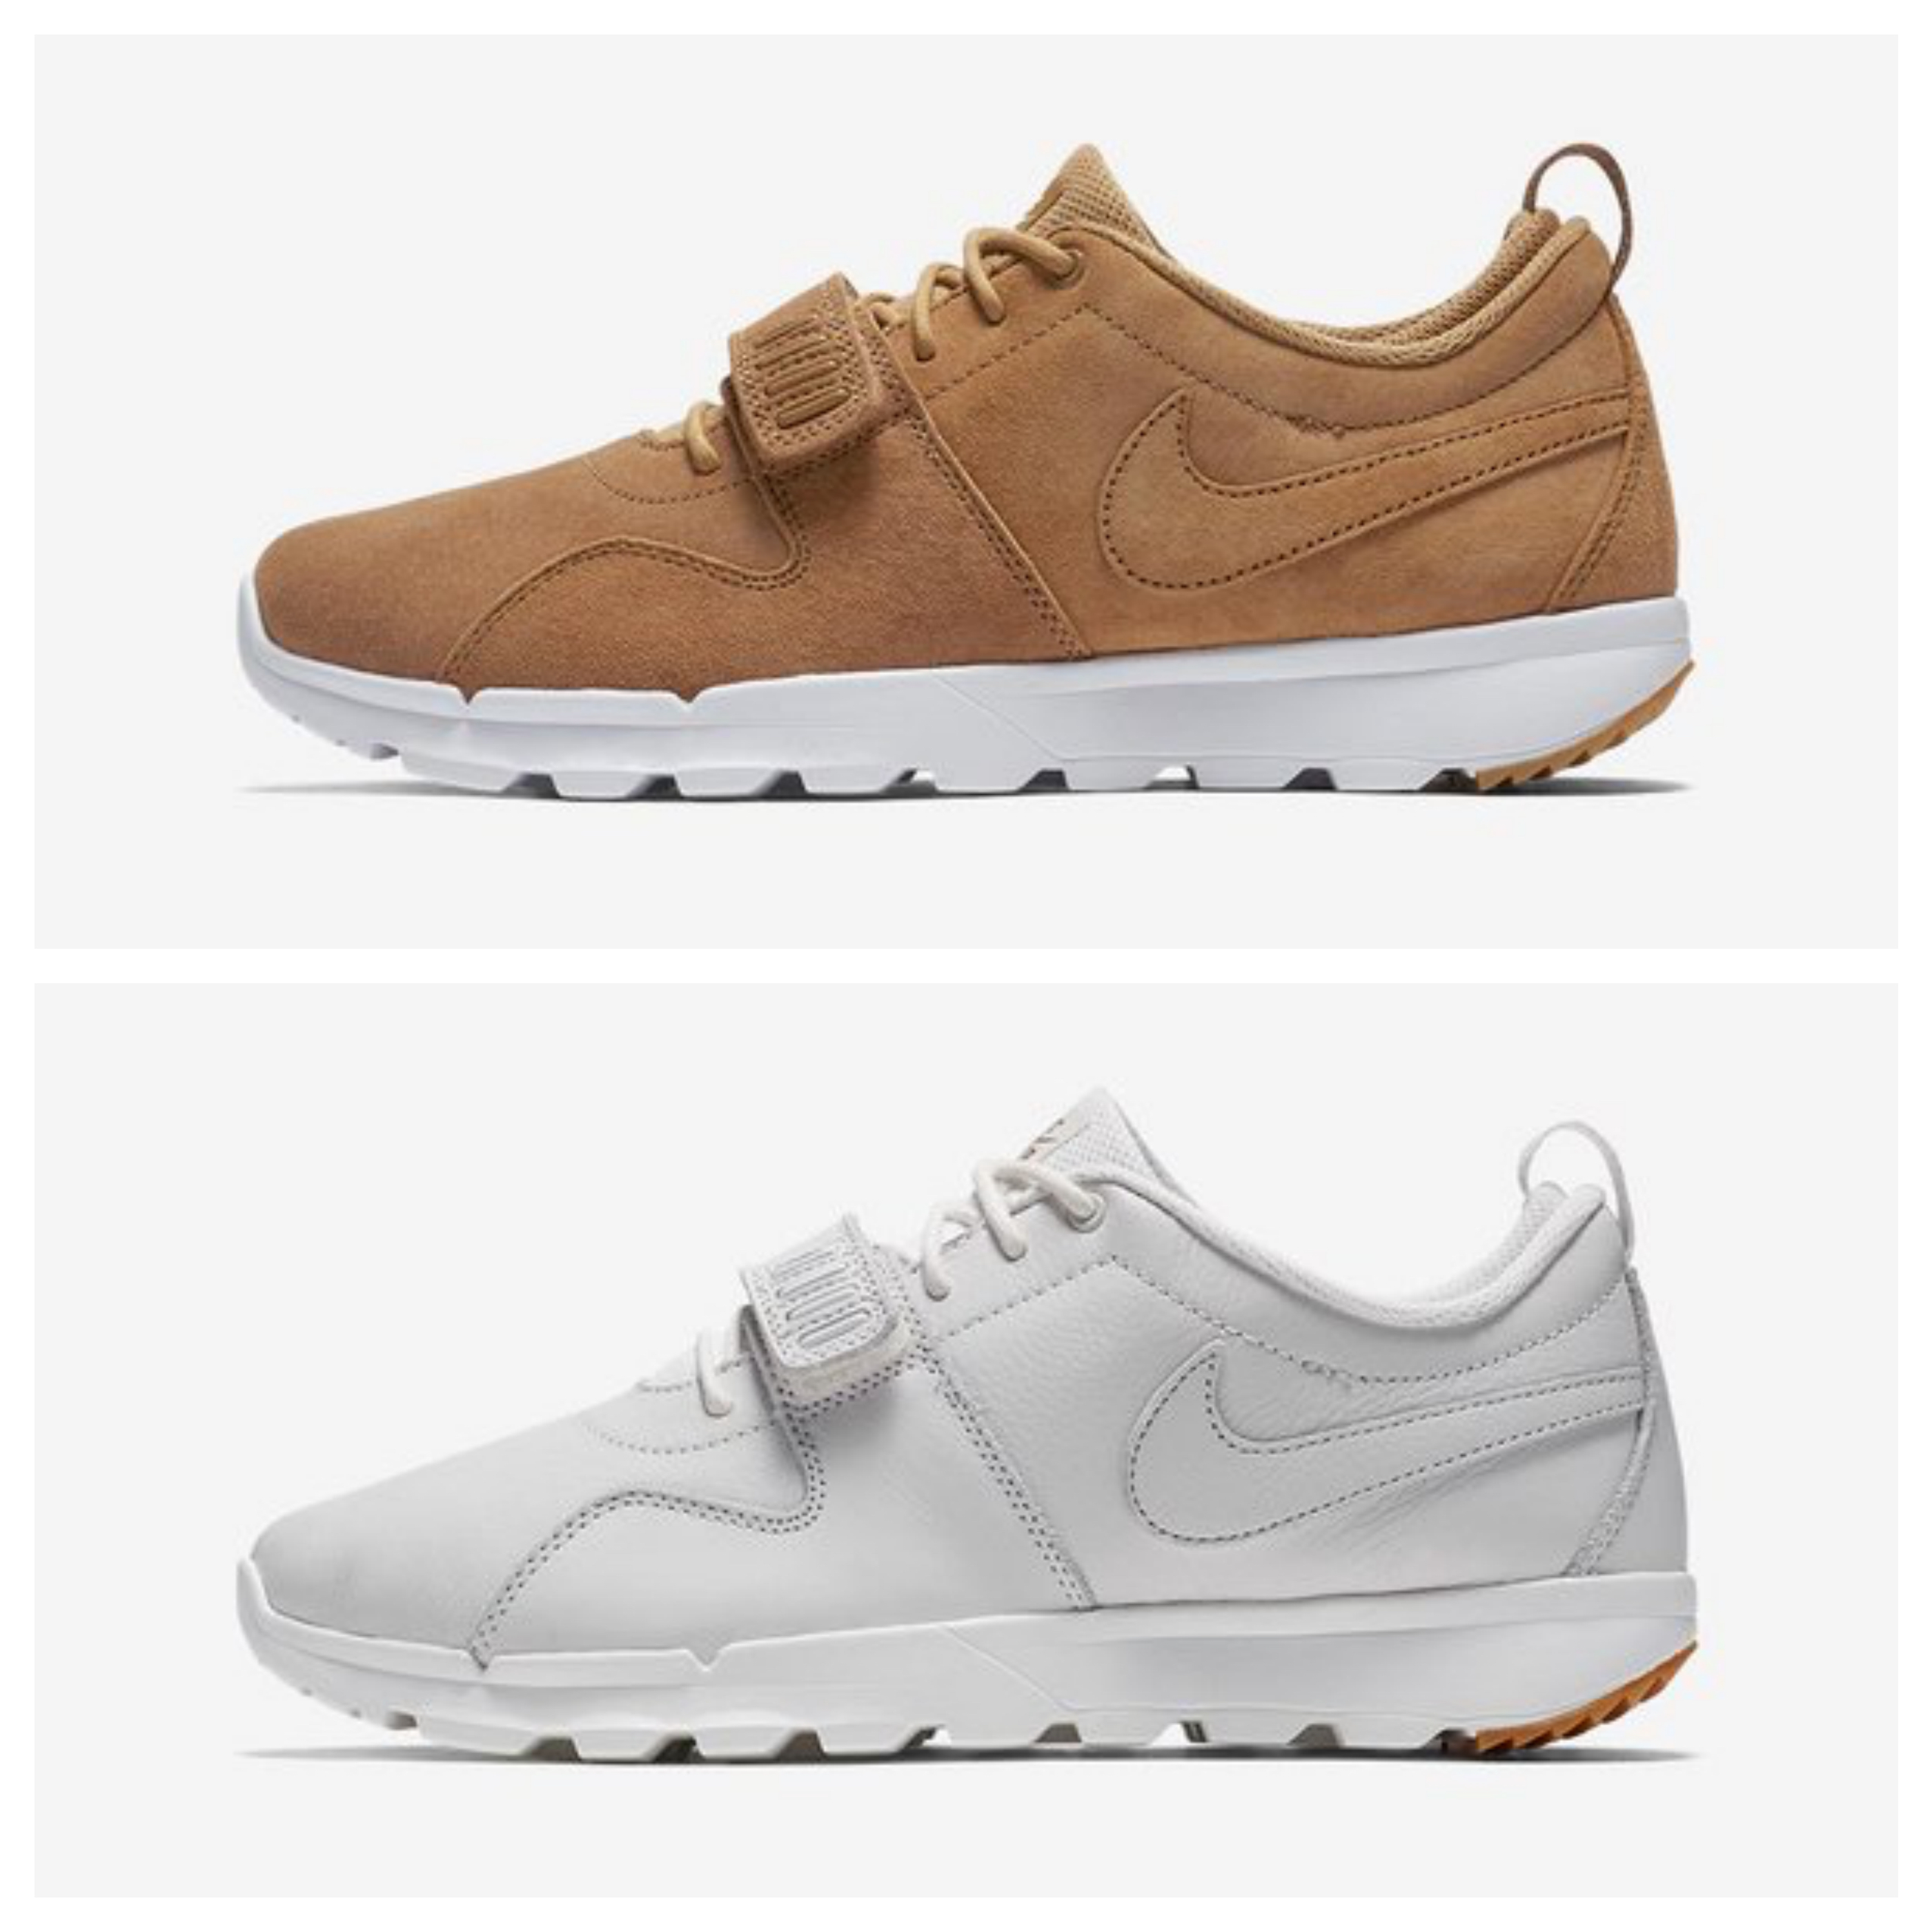 These Nike TrainerEndor Colorways are Perfect - WearTesters